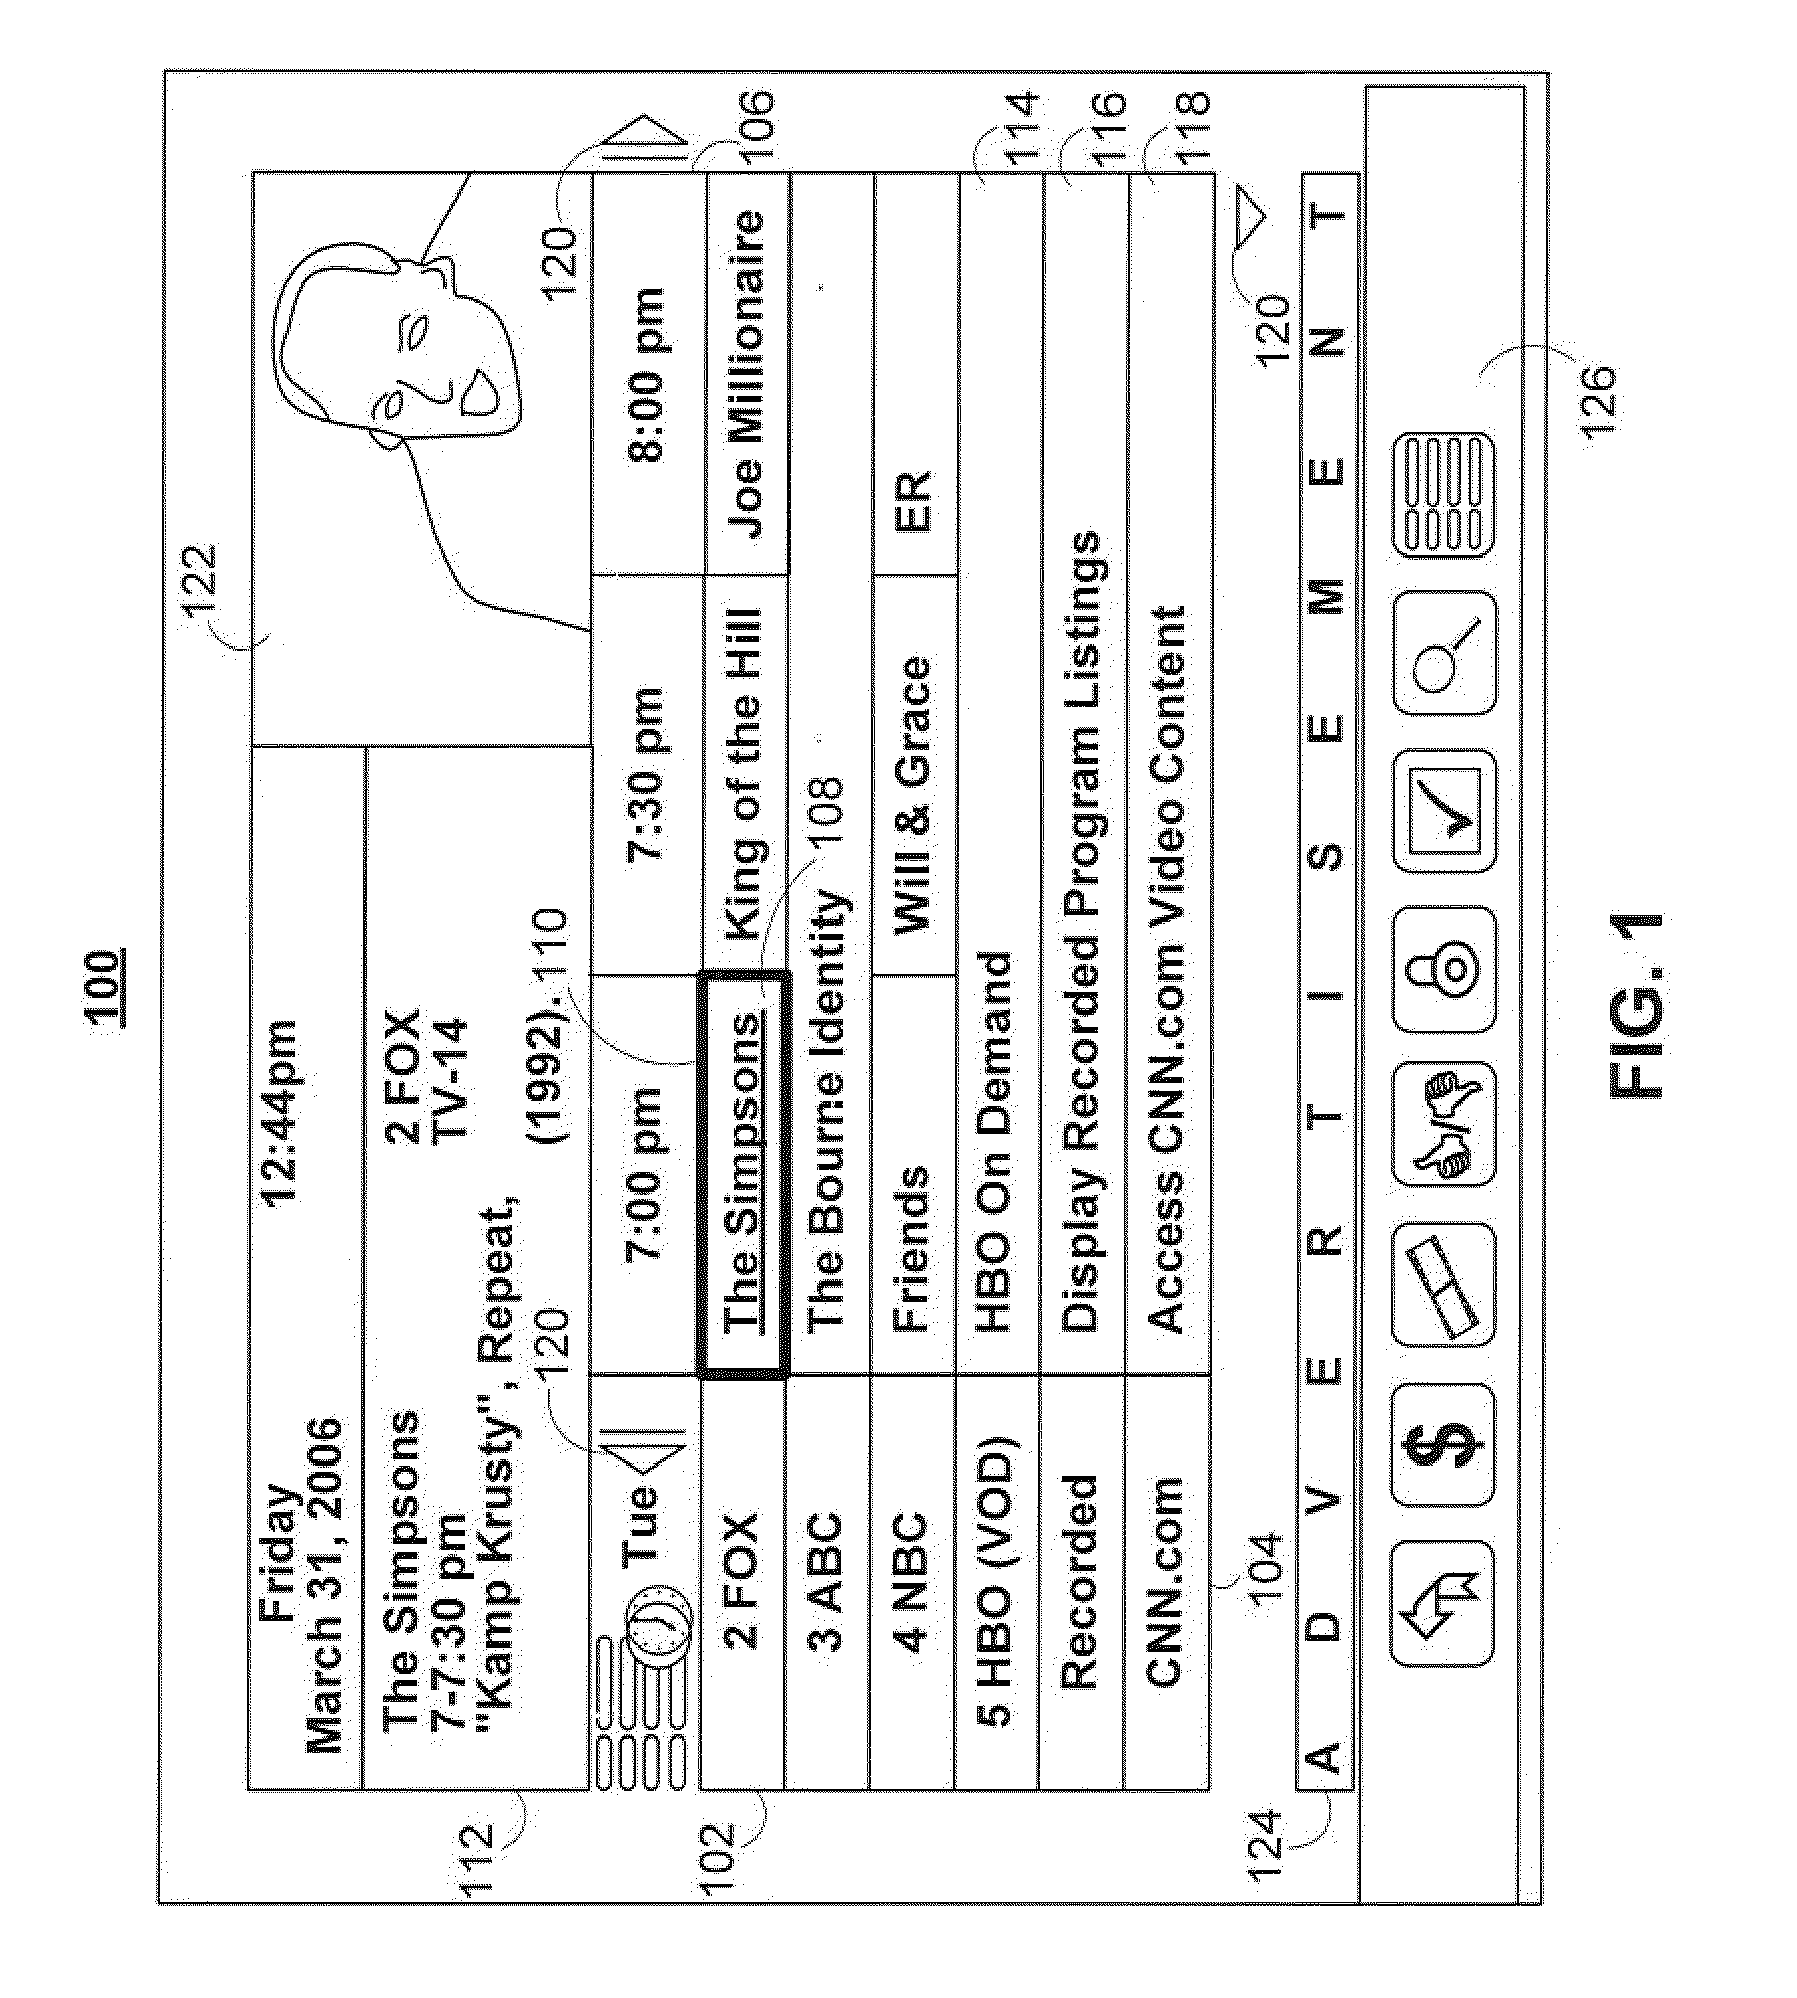 Systems and methods for providing automatic parental control activation when a restricted user is detected within range of a device